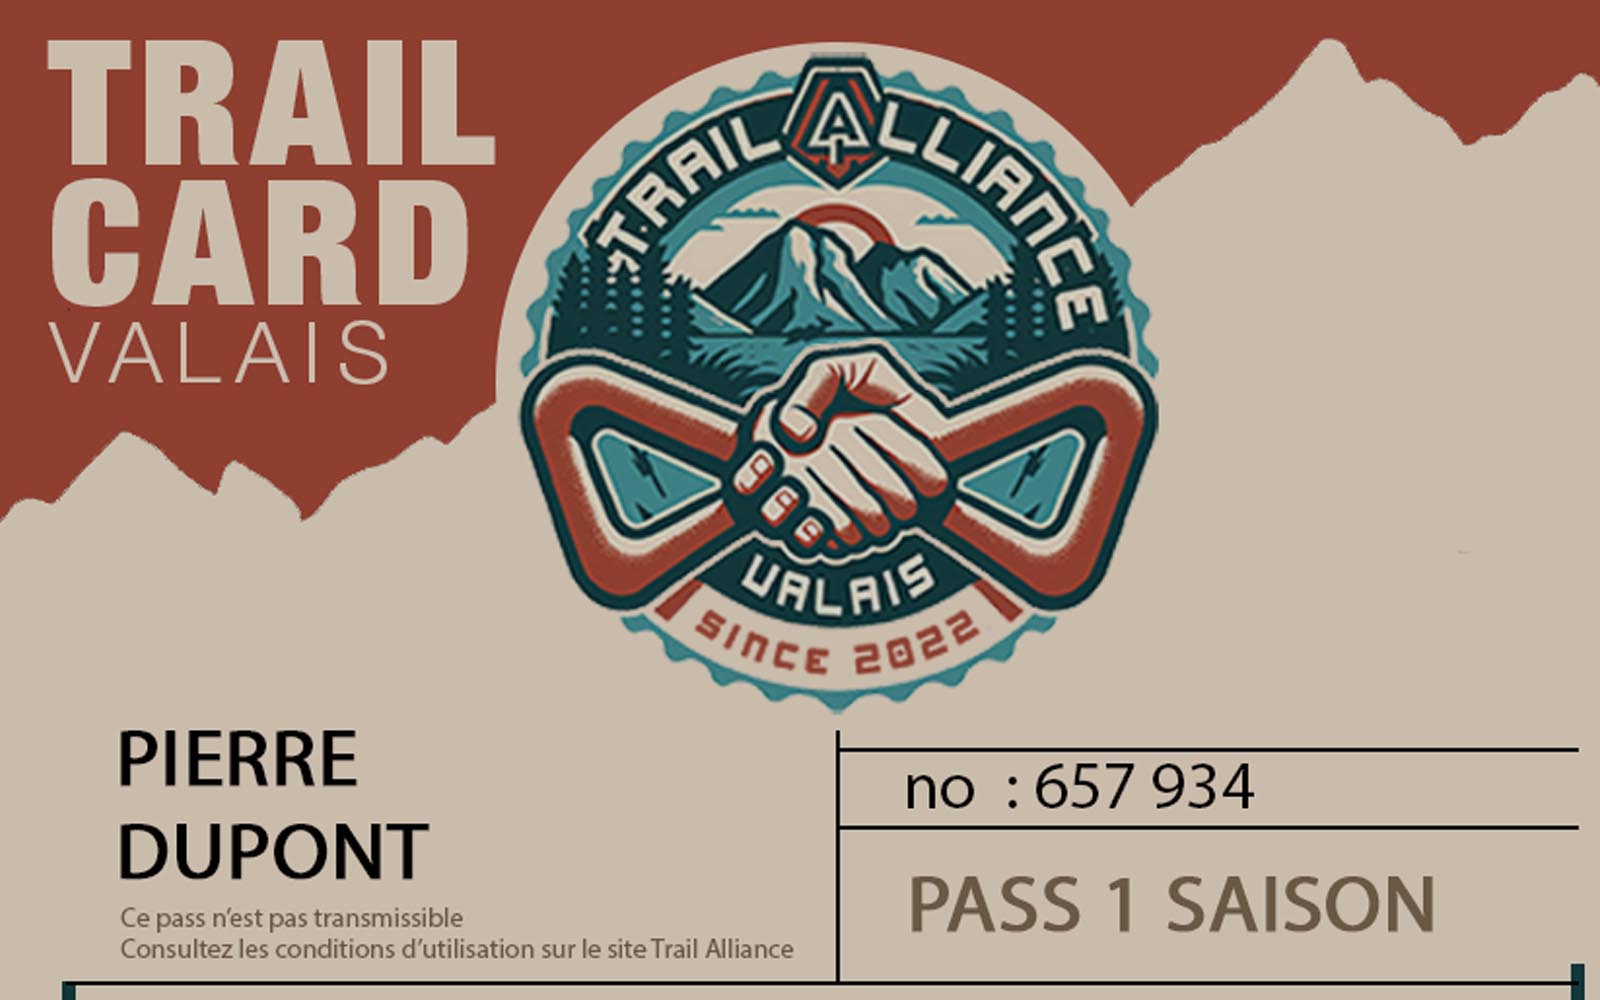 Launch of the Trail Card